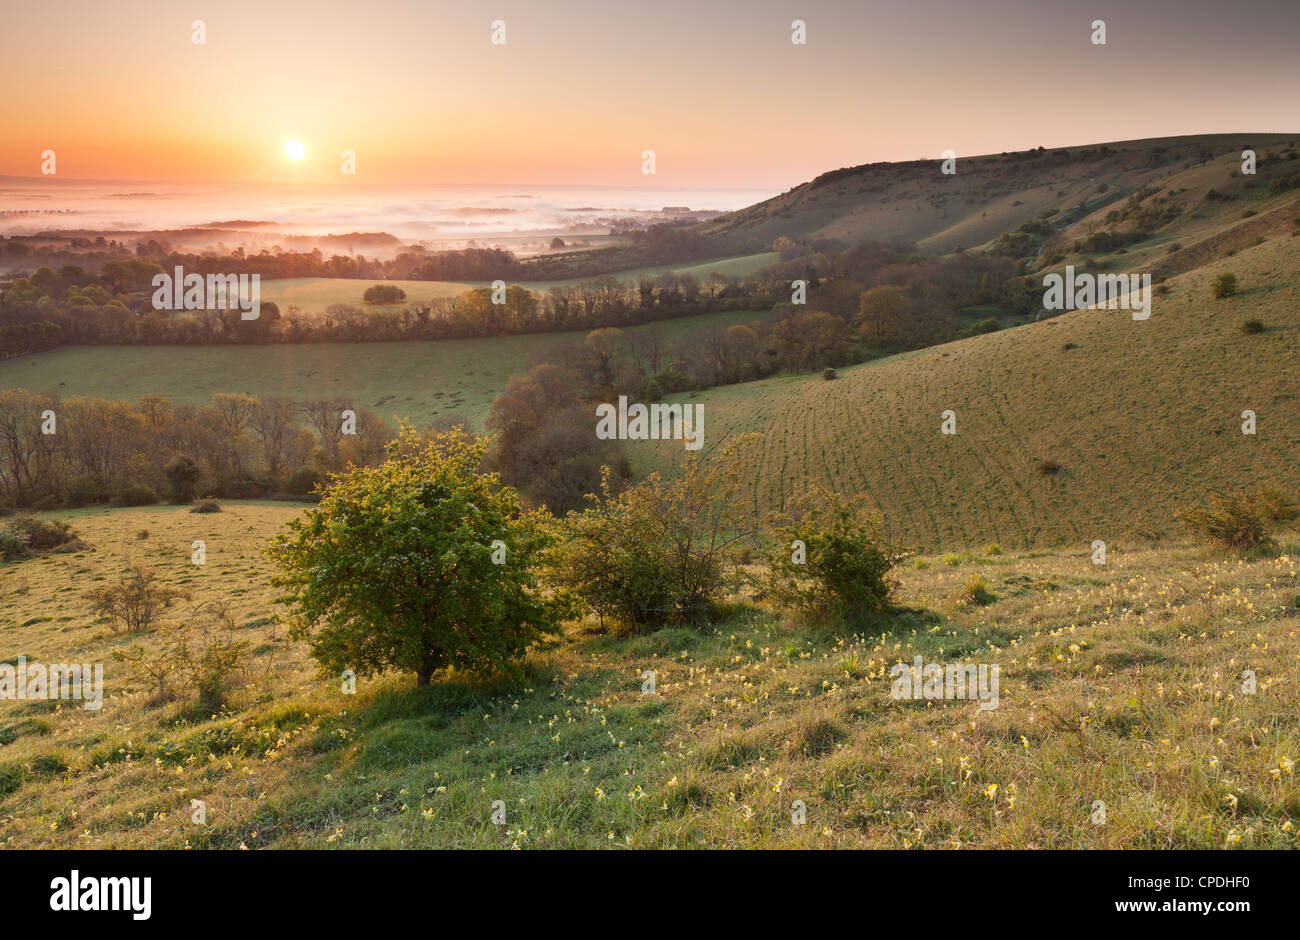 A beautiful sunrise at Ditchling Beacon, South Downs National Park in East Sussex, England, UK Stock Photo